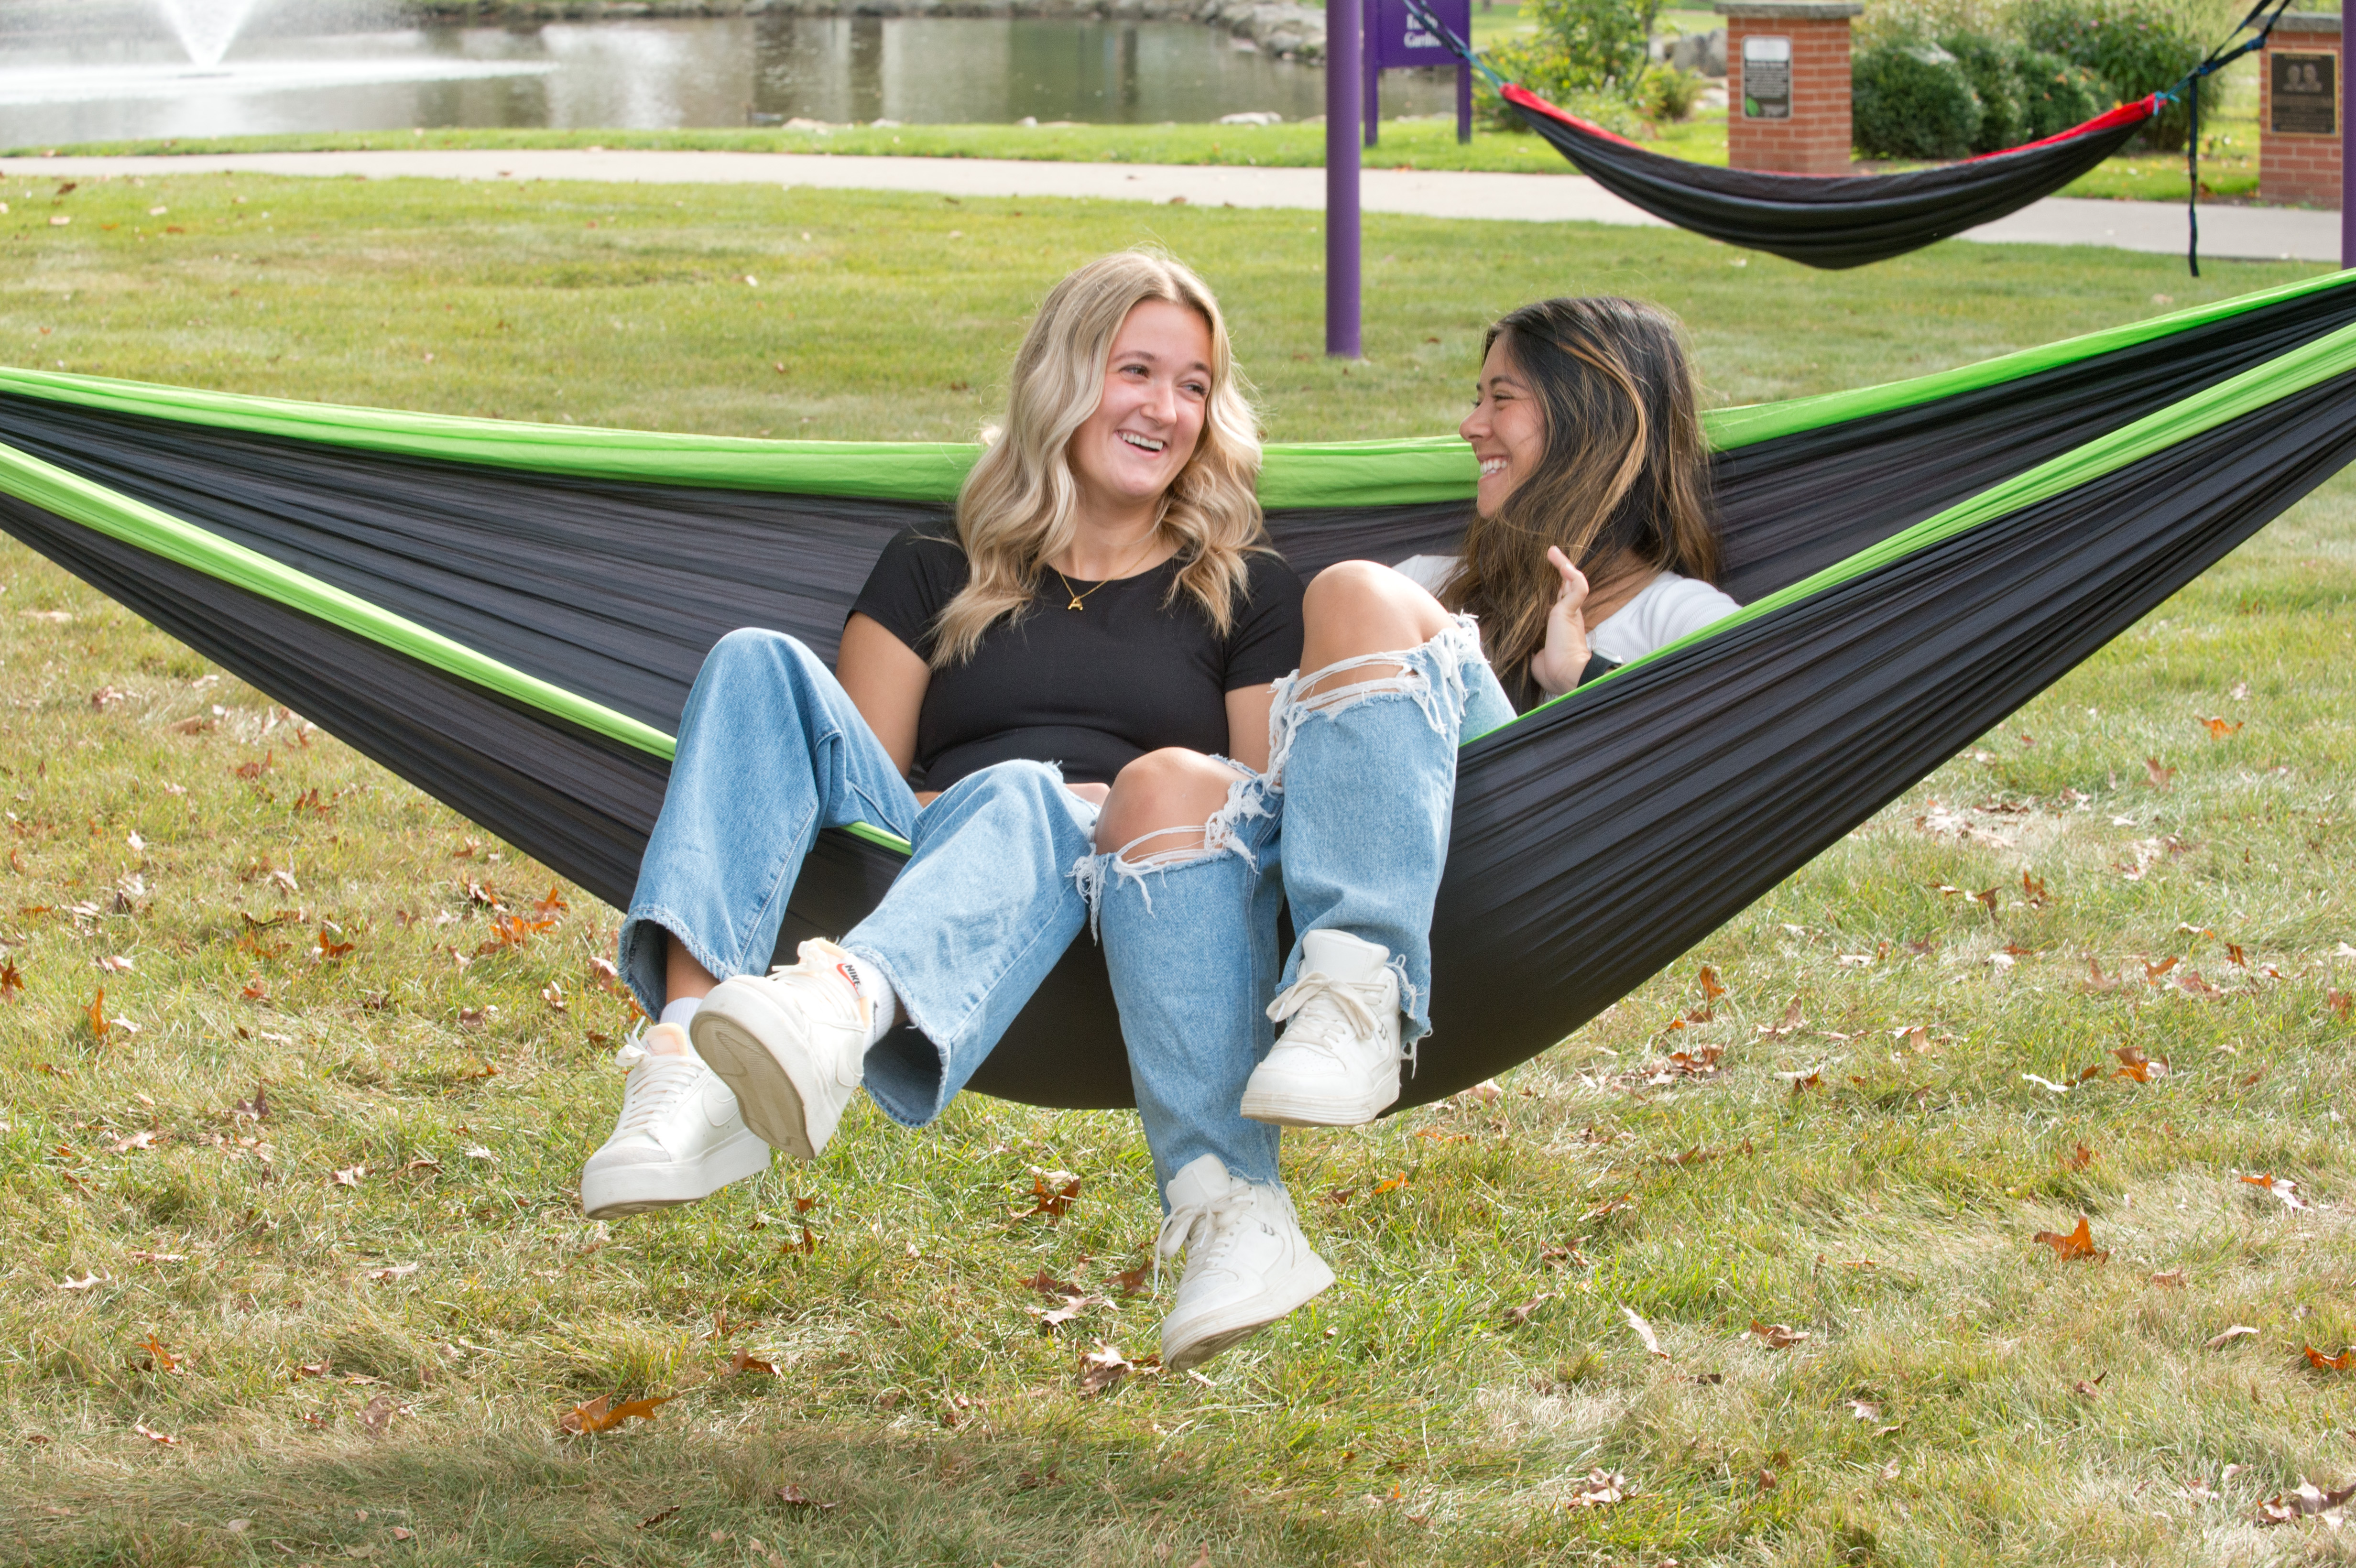 Smiling Mount Union students sitting together on a hammock at the Campus Lakes.